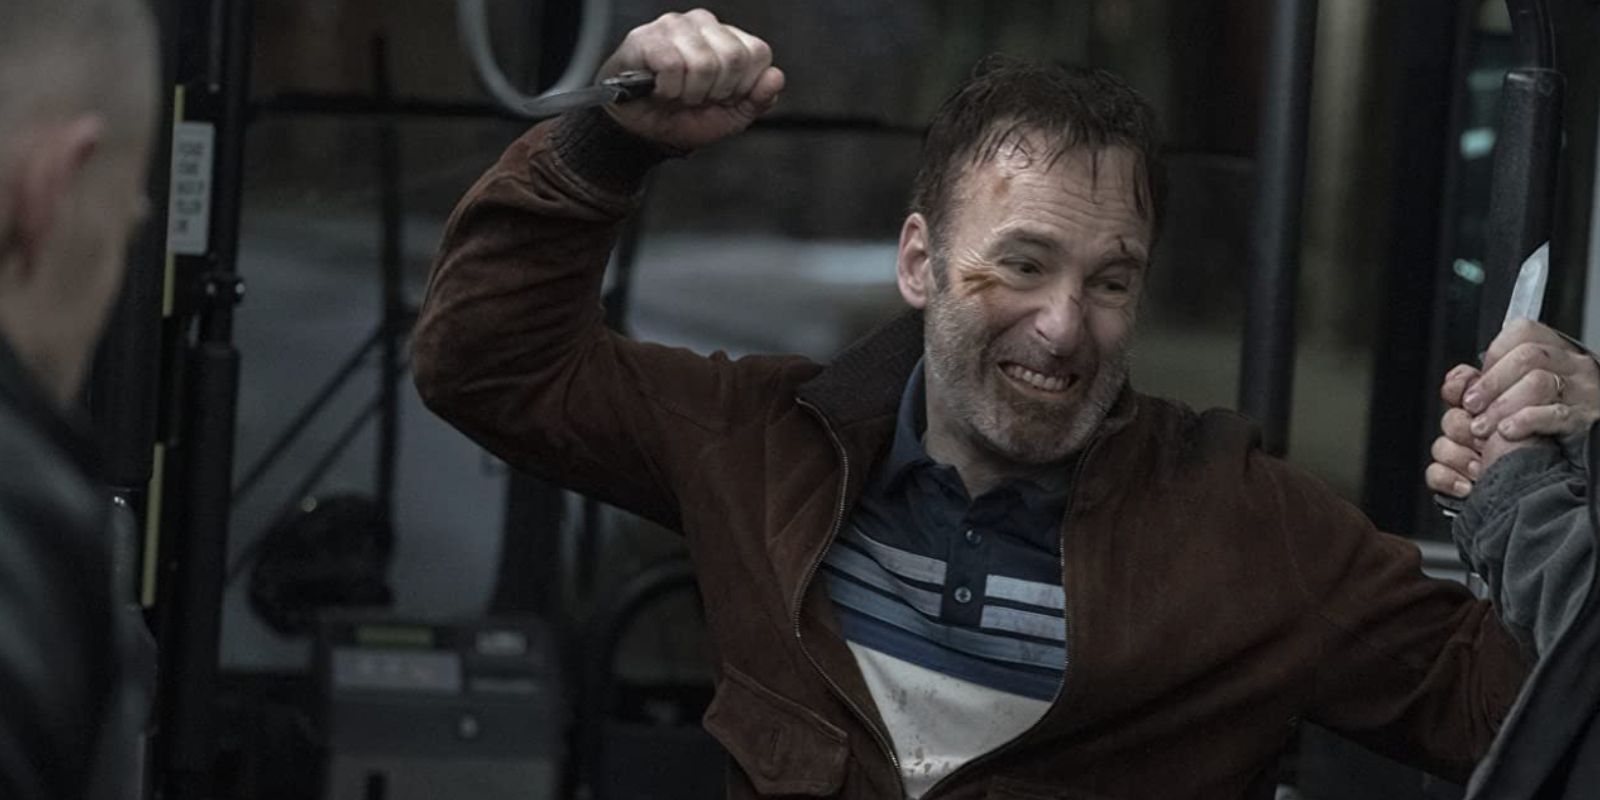 Bob Odenkirk fights with knives in Nobody movie